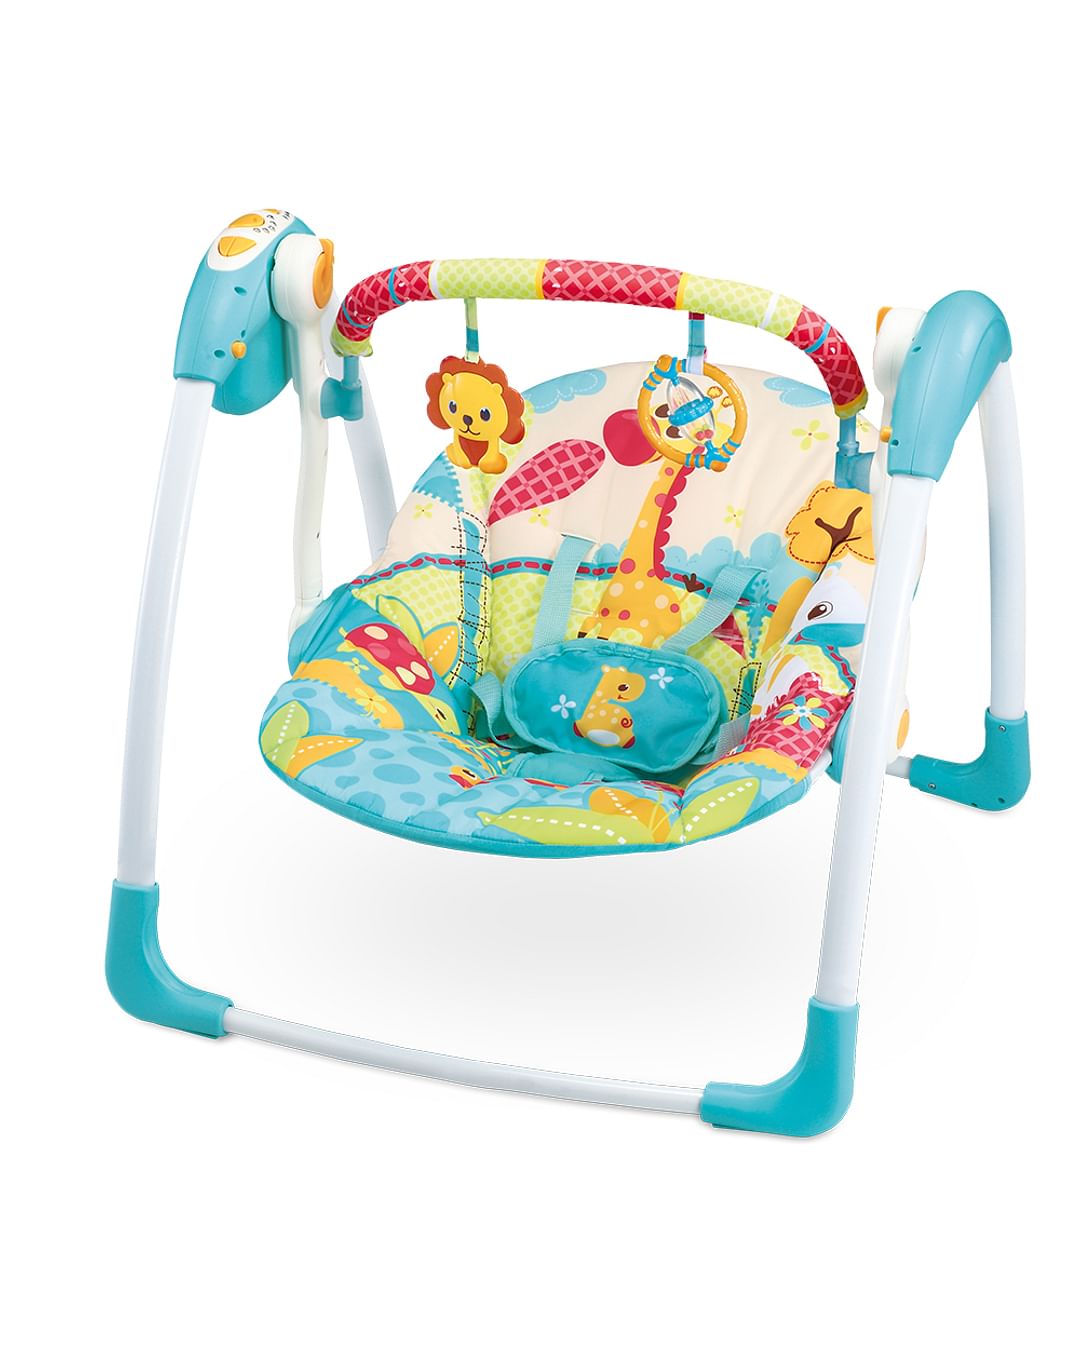 Deluxe Portable Auto Baby Swing by Mastela by 6579